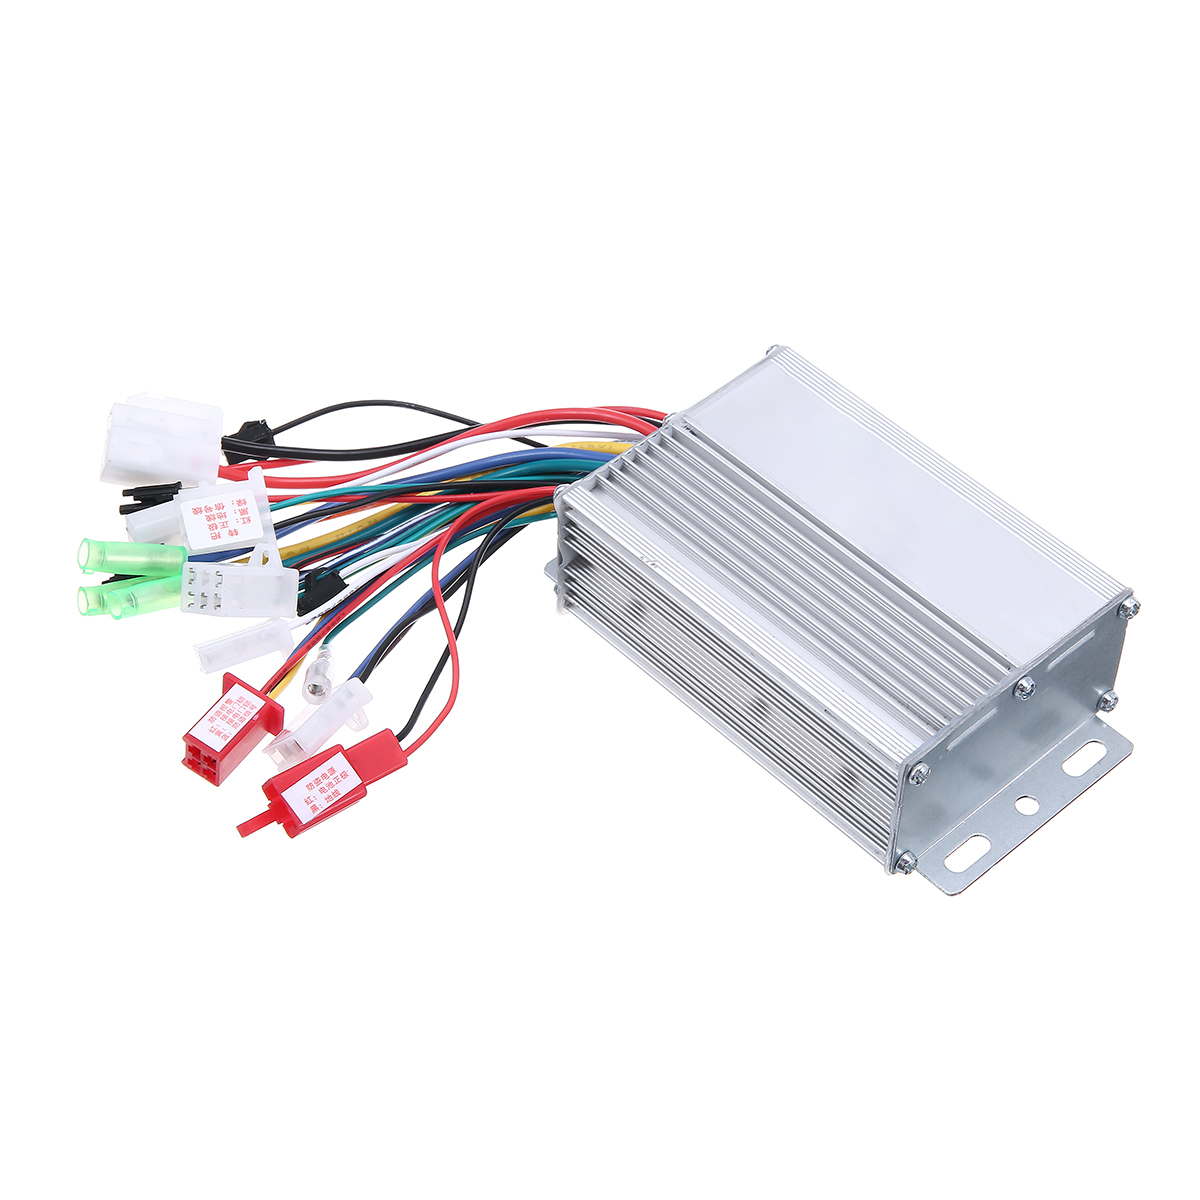 1Pcs 36V/48V 350W Brushless DC Motor Controller For Electric Bicycle E-bike Scooter High Quality Brushless Controller